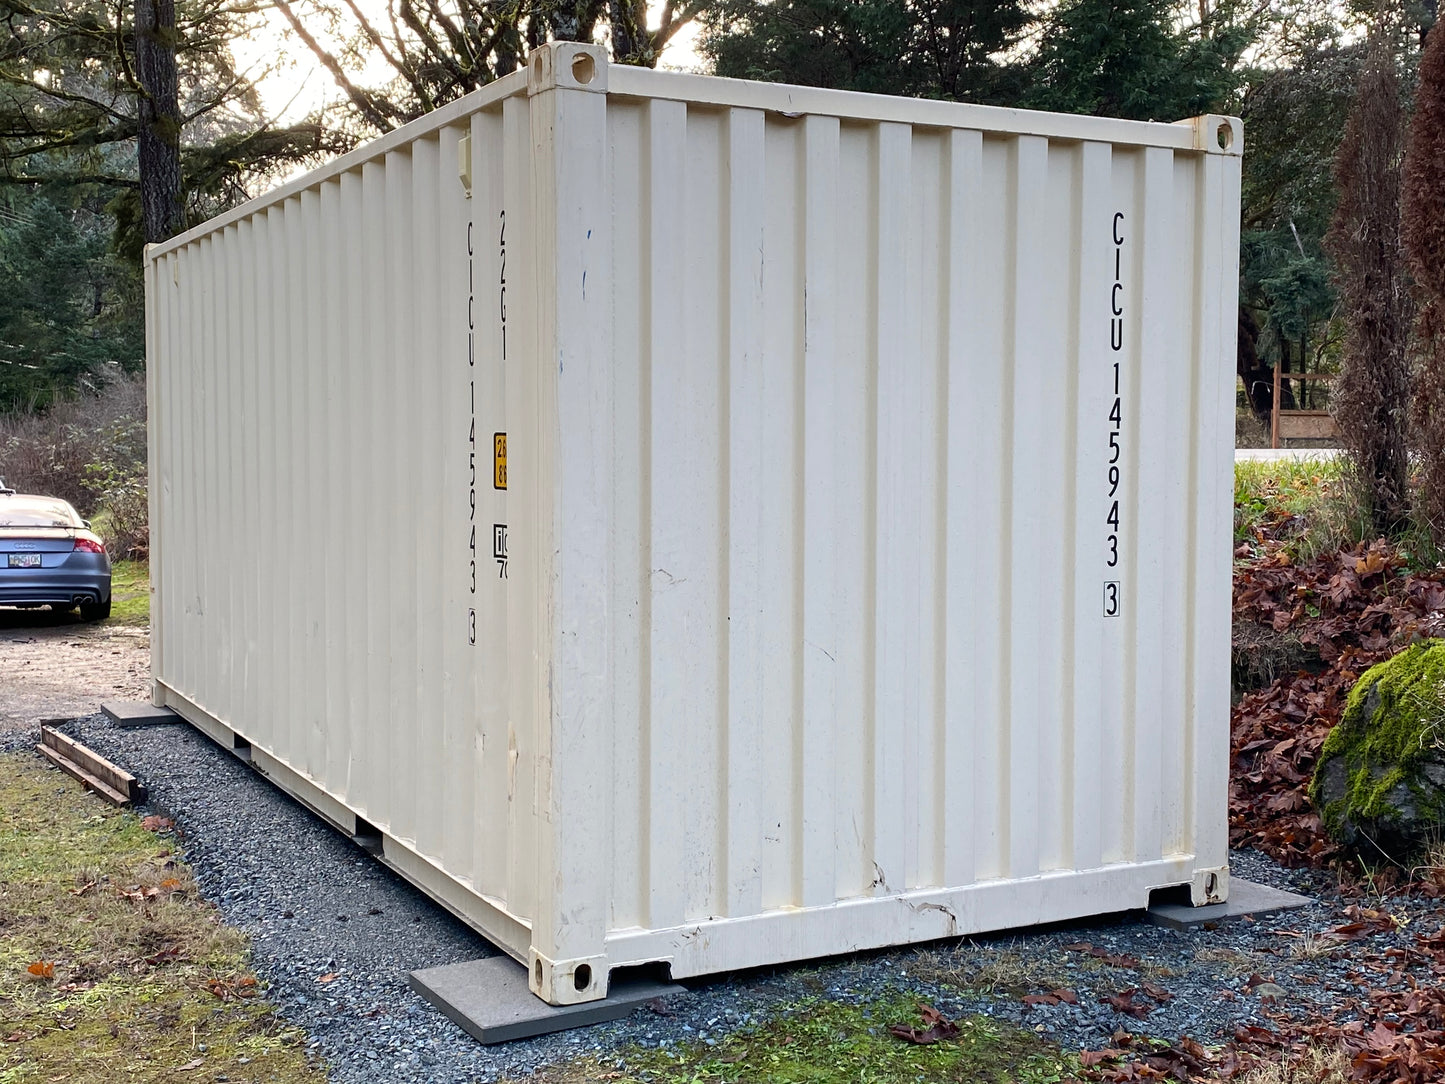 New 20' Shipping Container - Ottawa